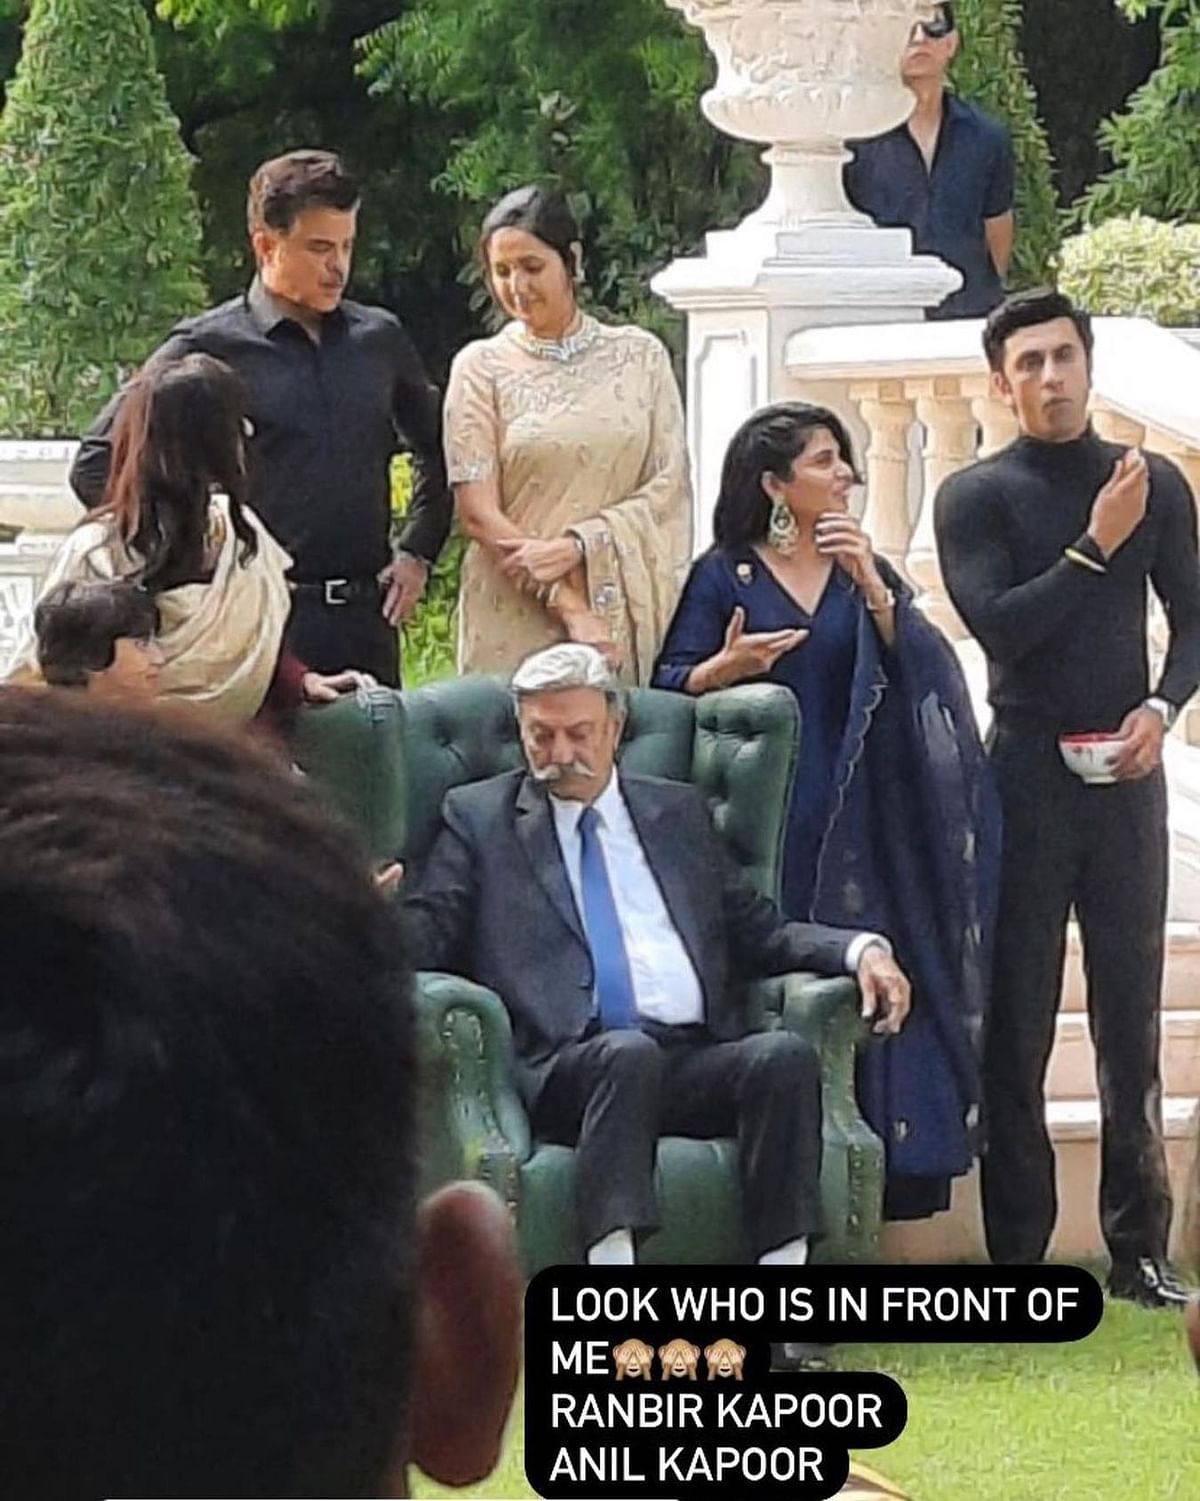 The picture of Anil Kapoor and Ranbir Kapoor is from a shoot for 'Animal' at the Pataudi Palace.